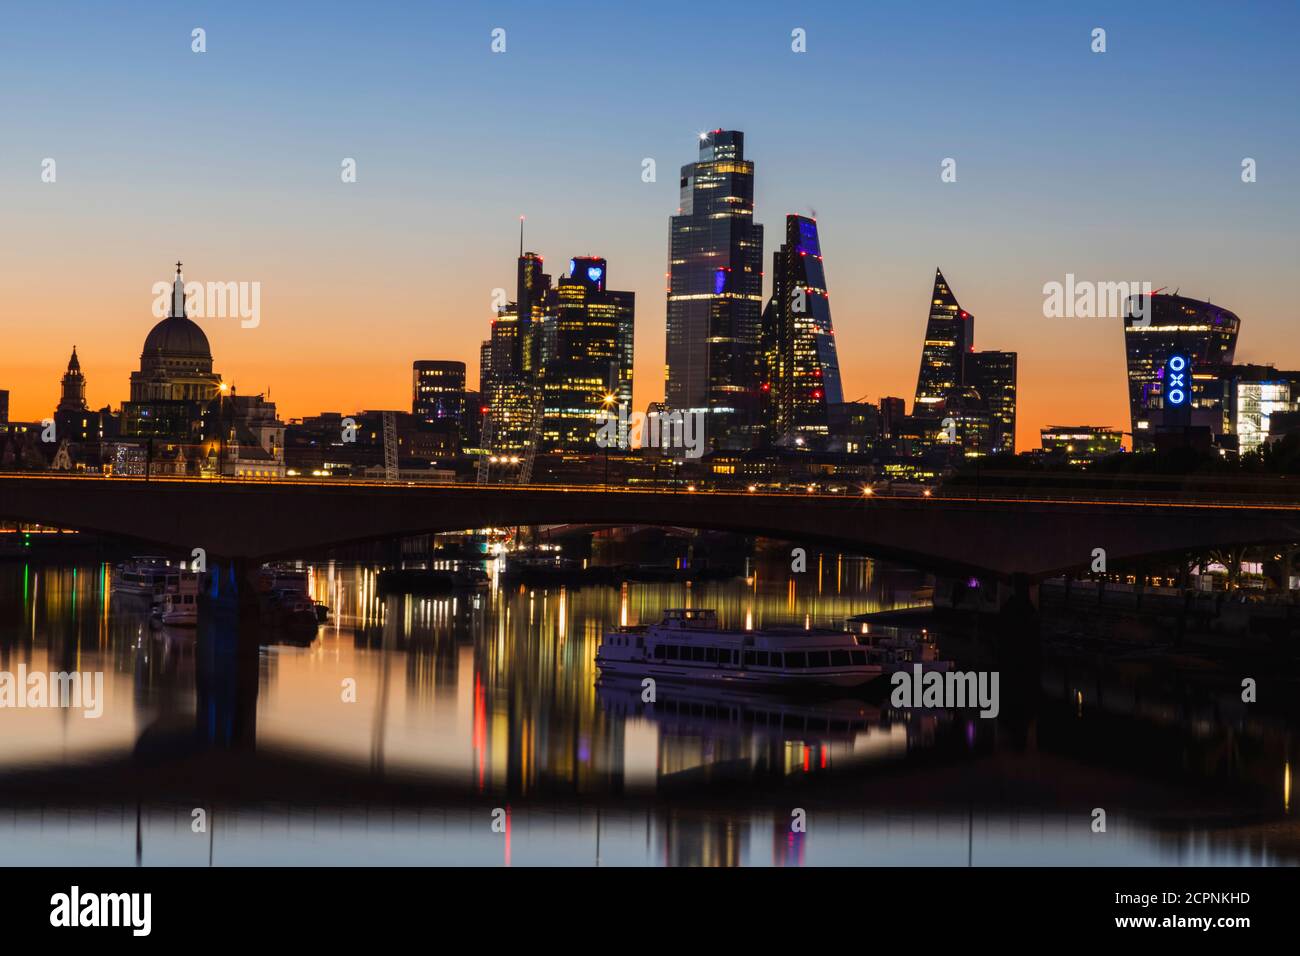 England, London, River Thames and City Skyline at Night Stock Photo